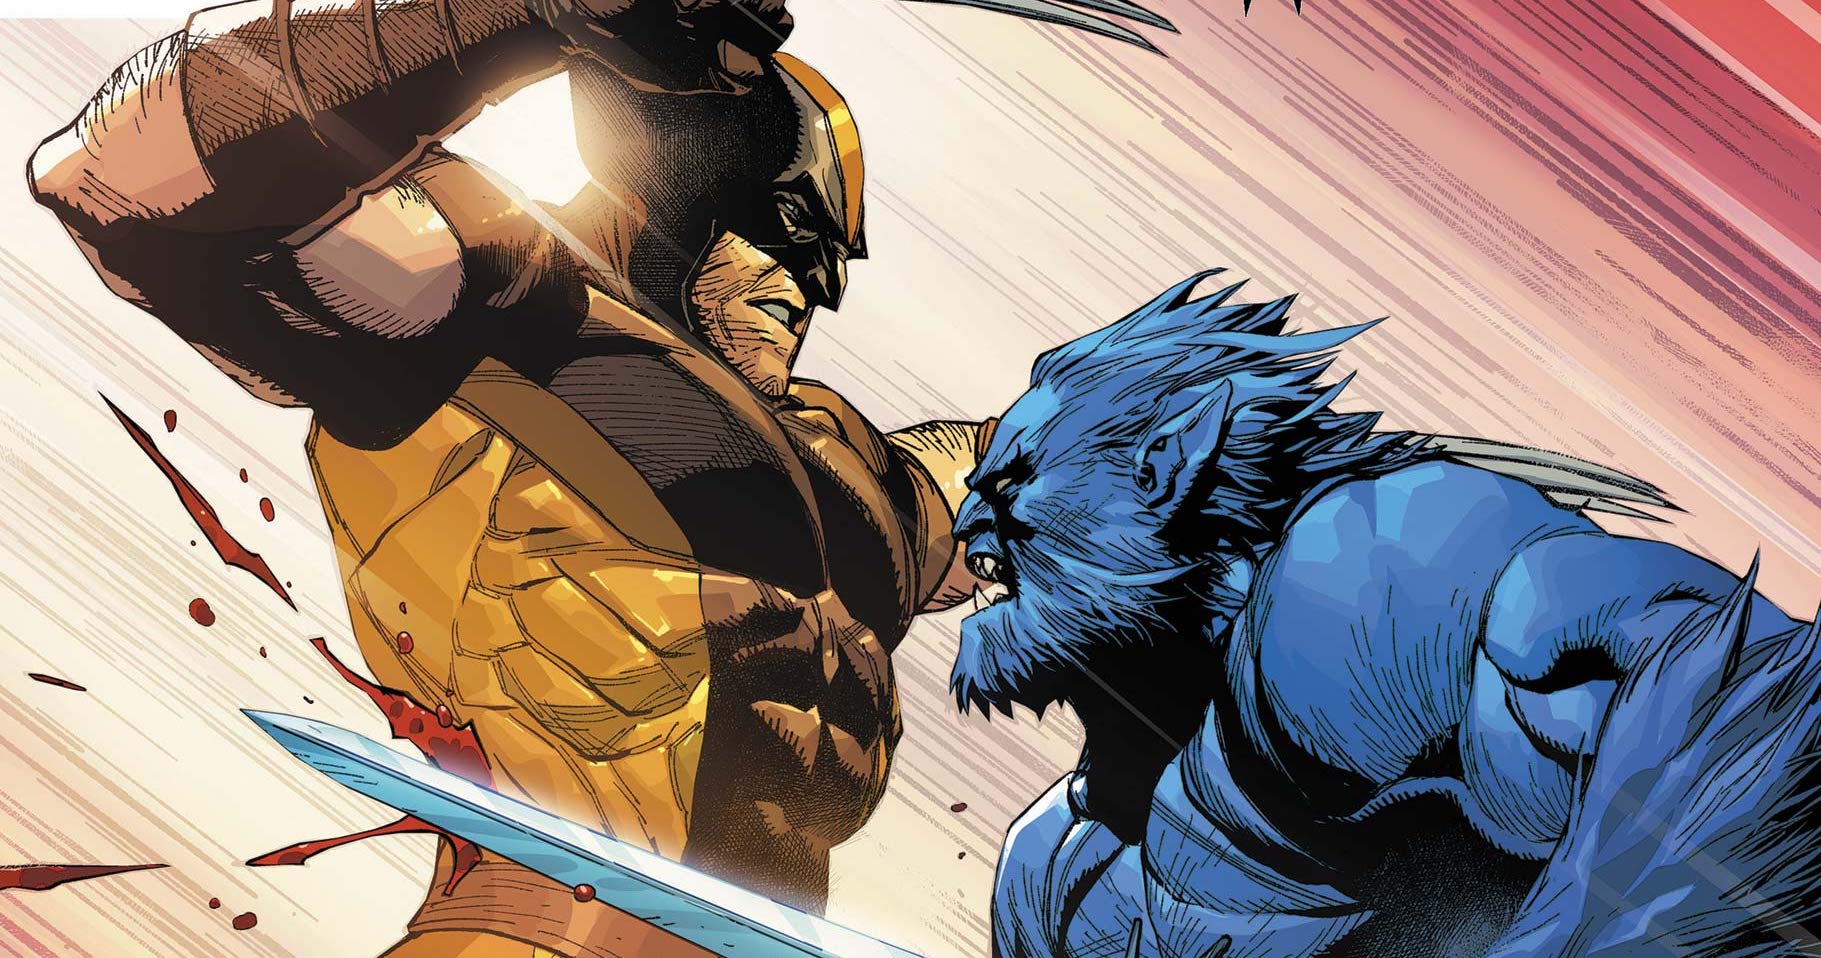 'Wolverine' #33 features the rise of Beast clones